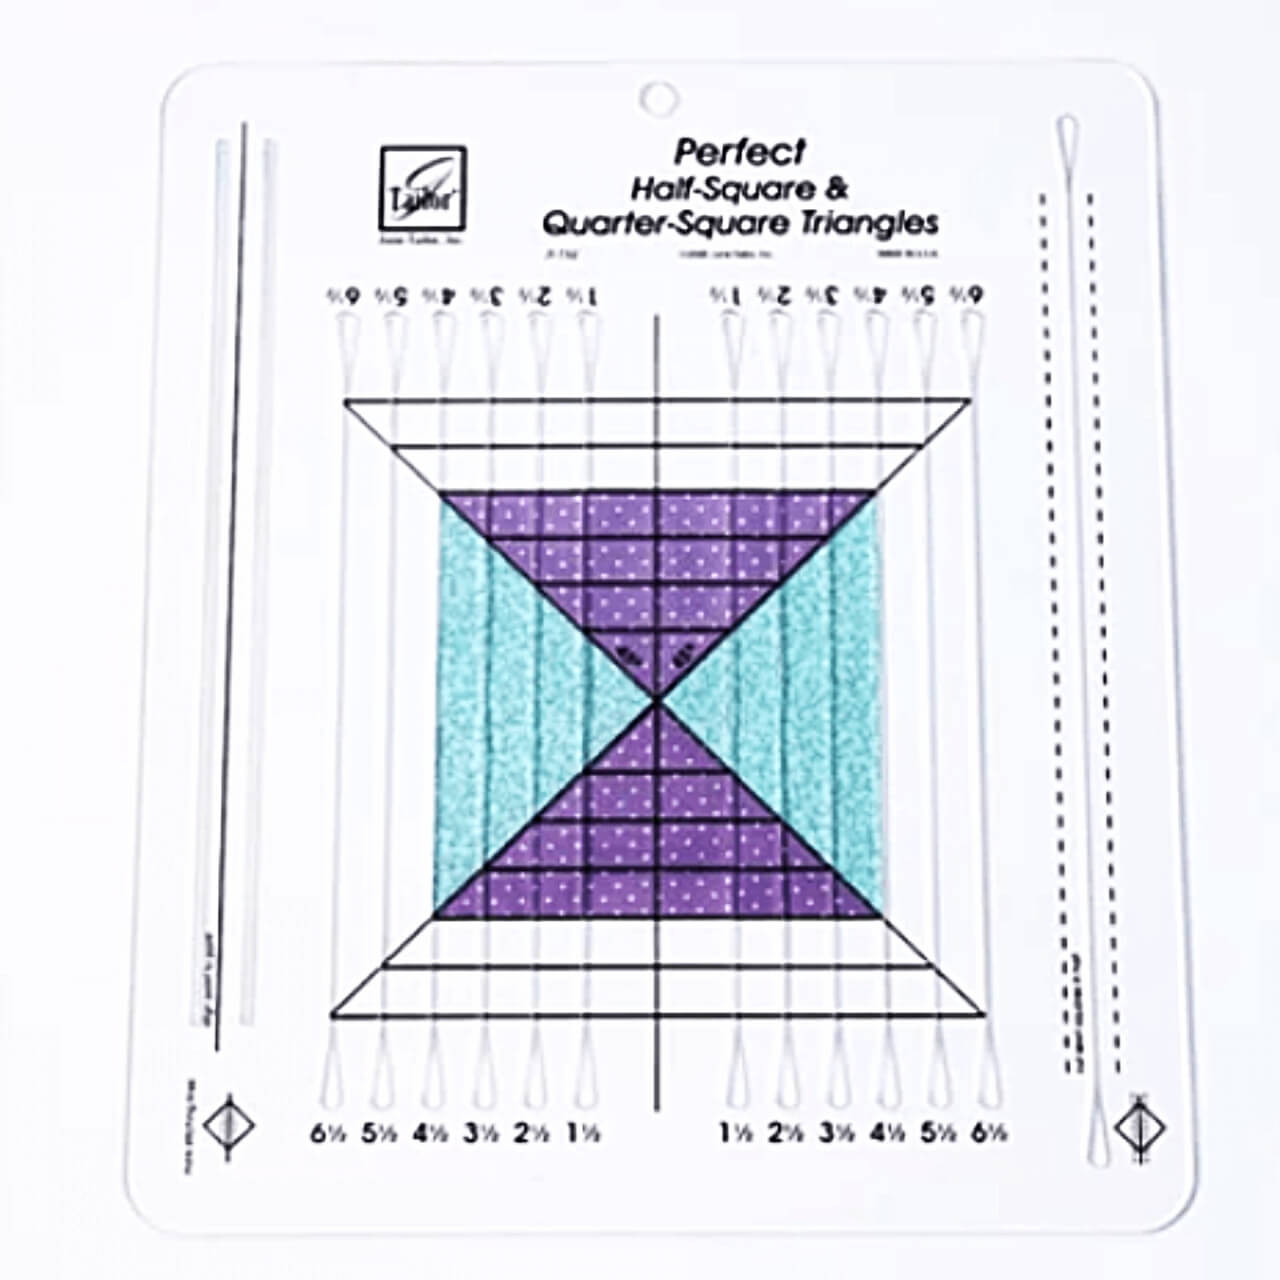 The June Tailor Half and Quarter Square Triangle Ruler is positioned over a quarter square triangle, with a patterned purple and solid teal fabric design, showcasing the ruler's utility in squaring up a QST for precise quilting work.